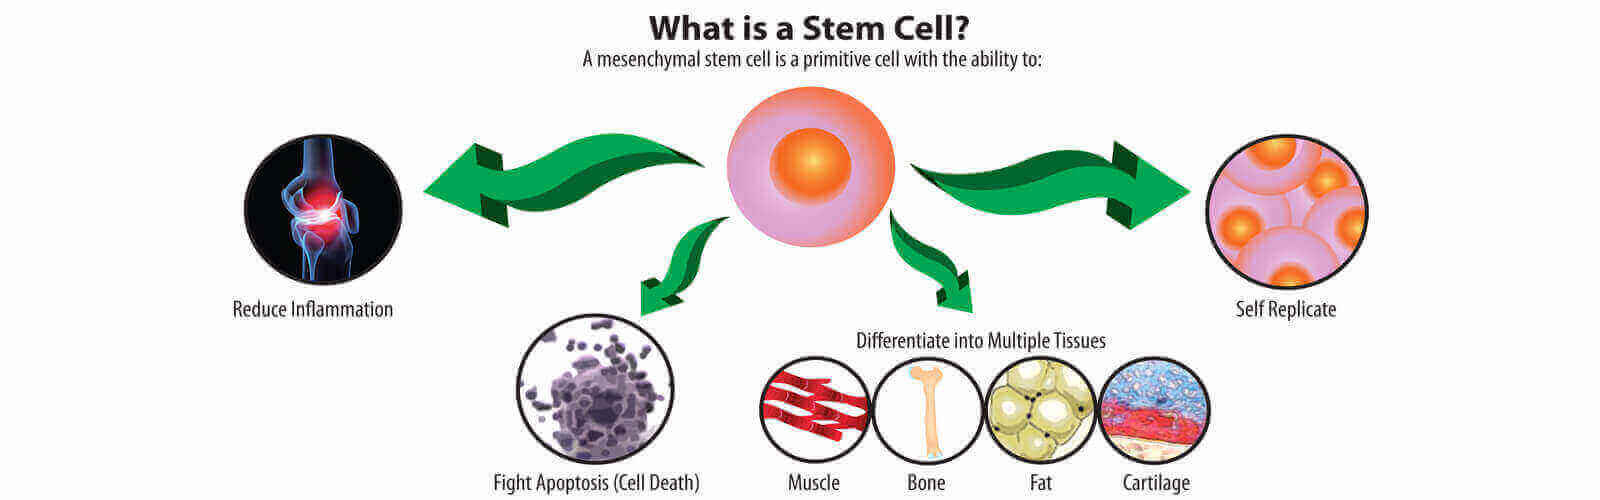 Stem Cell Treatment in India